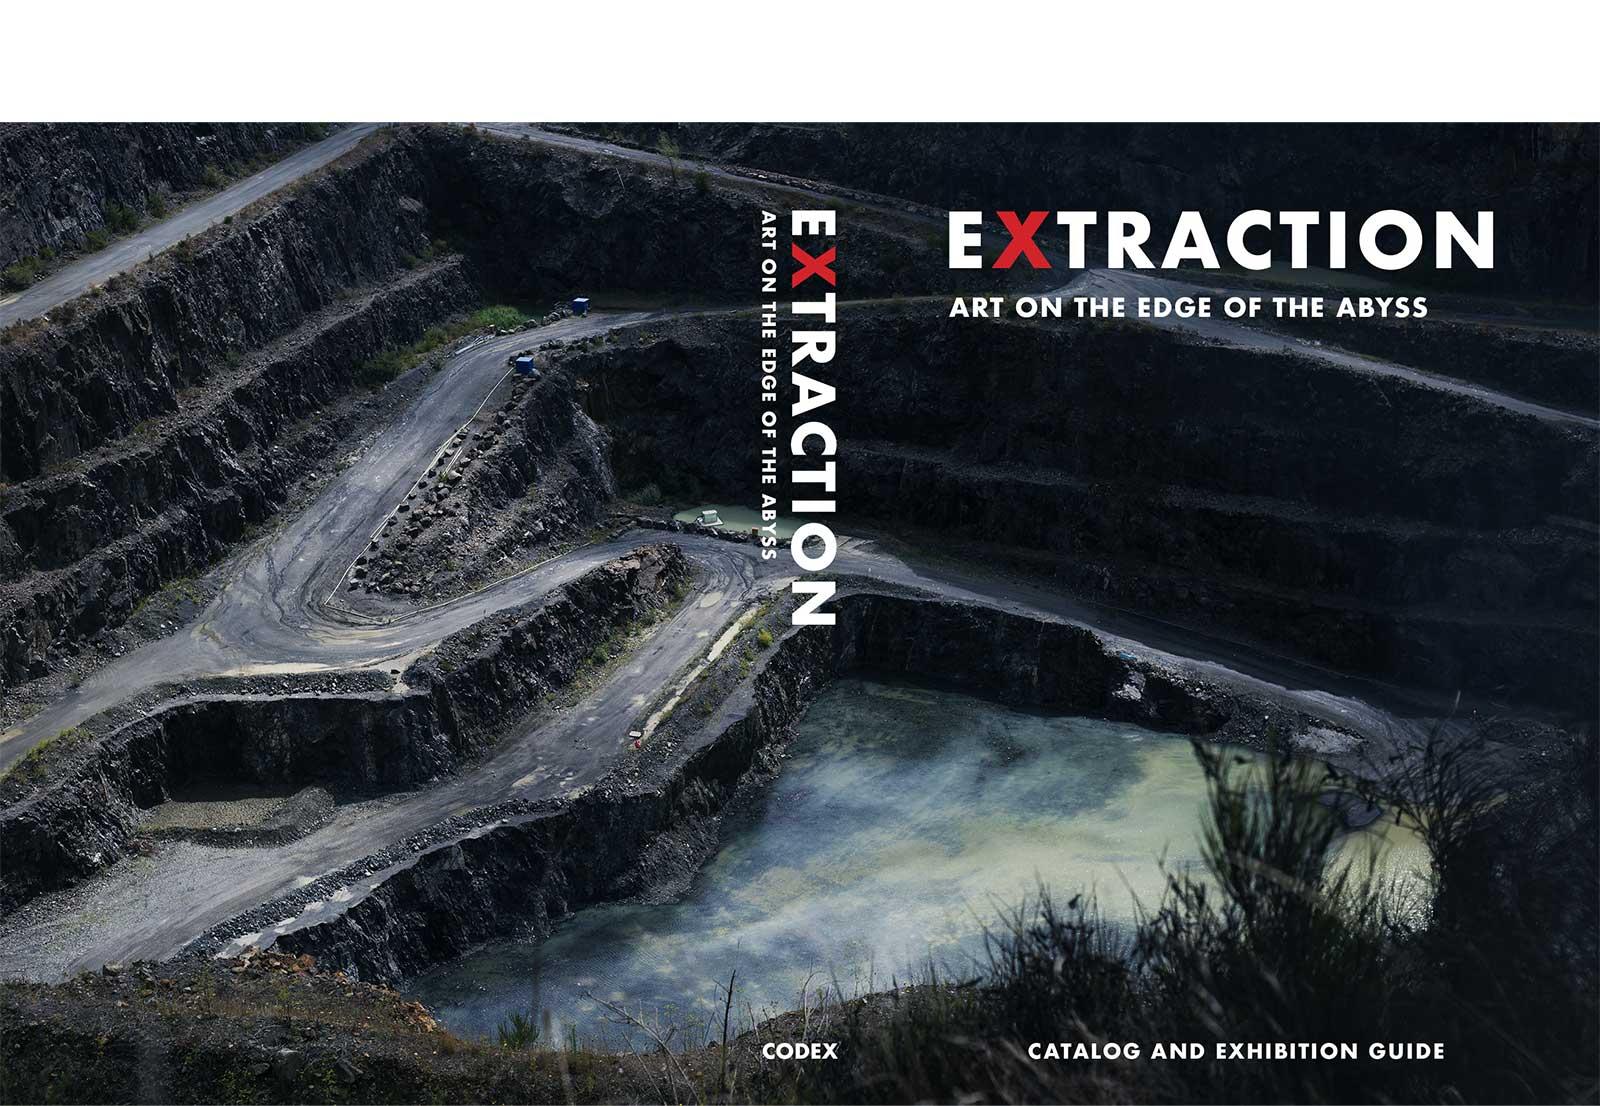 Cover image for the Extraction: Art on the Edge of the Abyss catalog and exhibition guidebook.